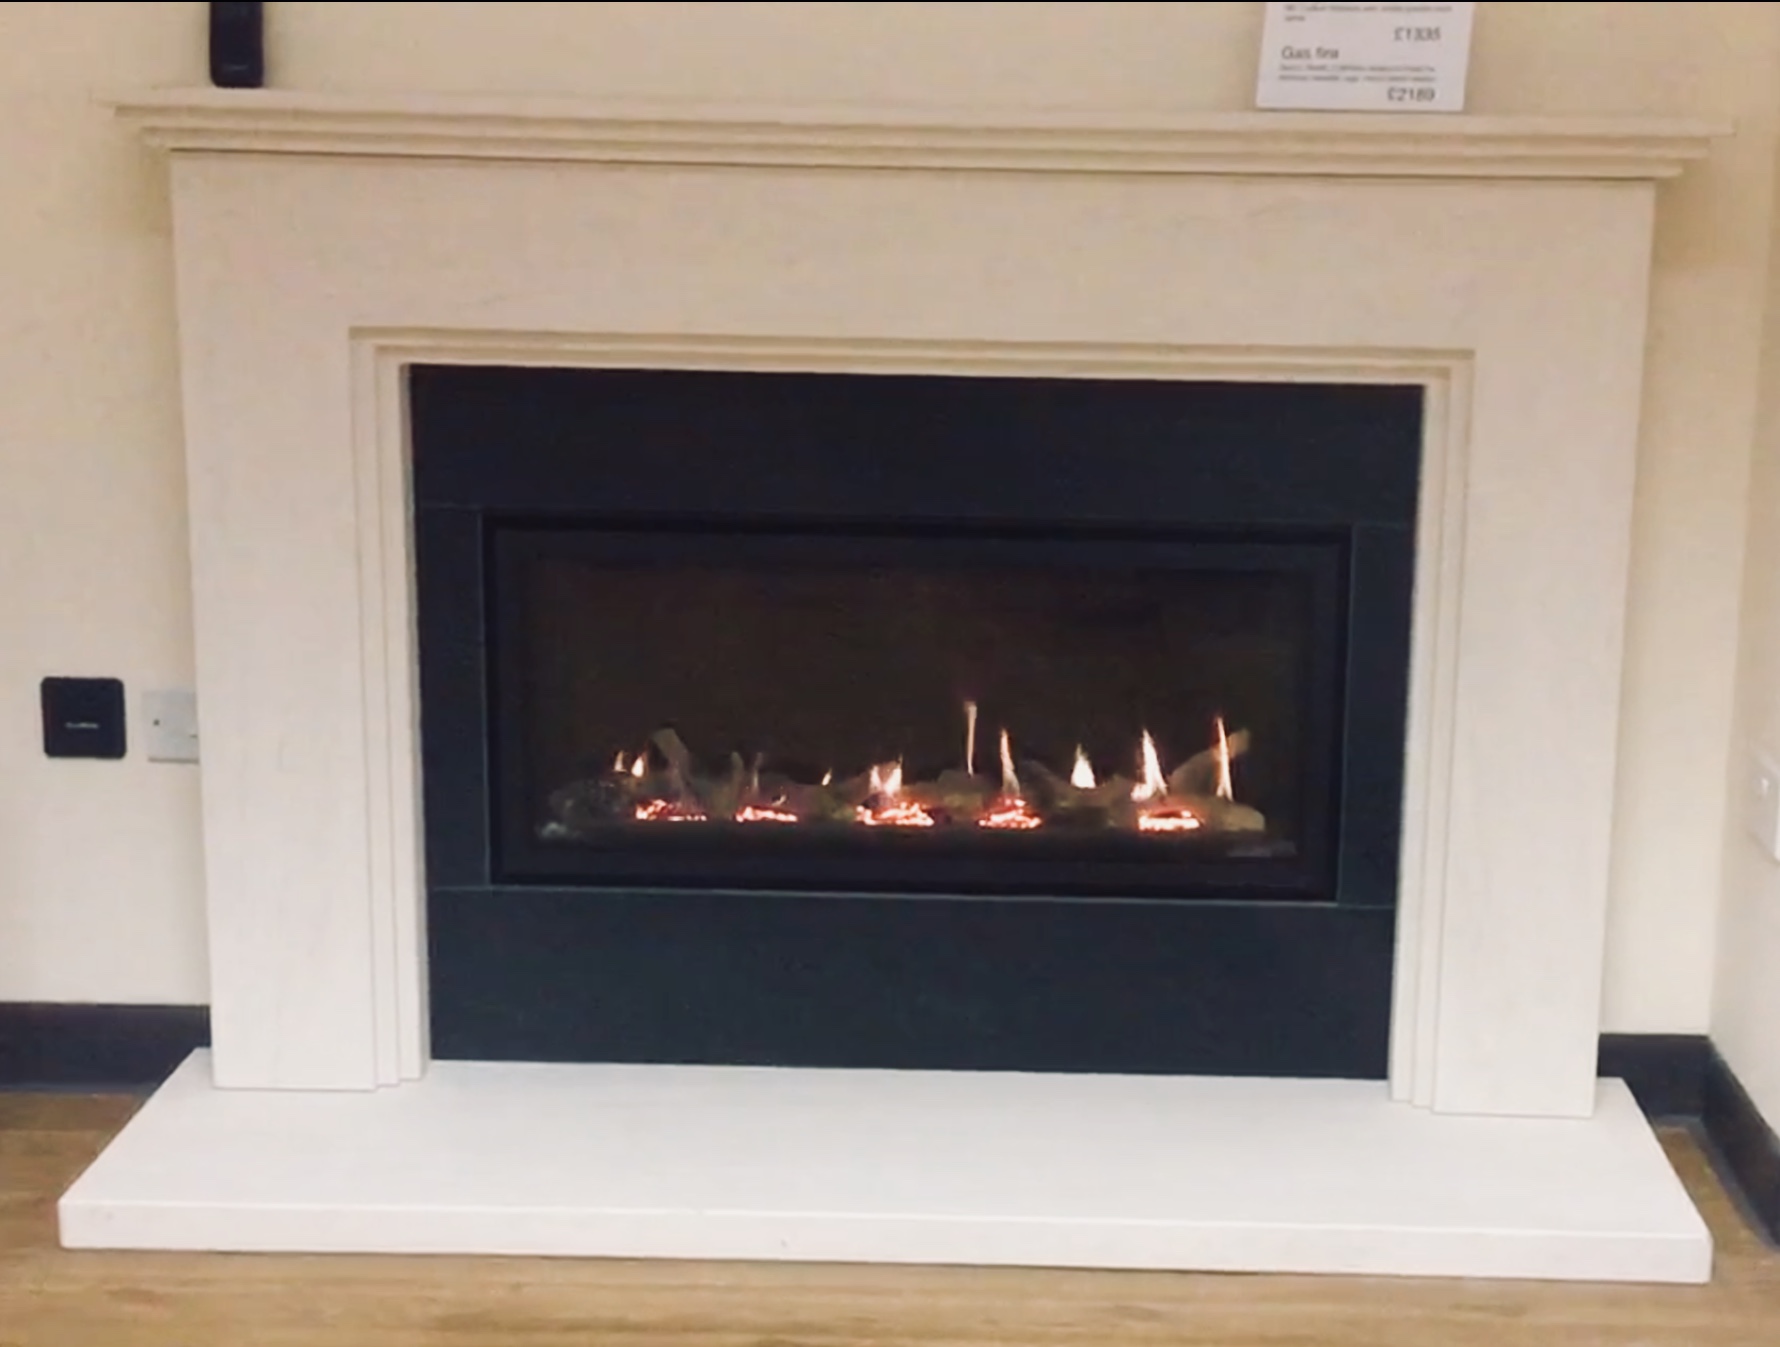 Studio Slimline -  Prices from £1,895 inc VAT Shown in Ludlow limestone with granite fireplace - Prices from £1,335 inc VAT